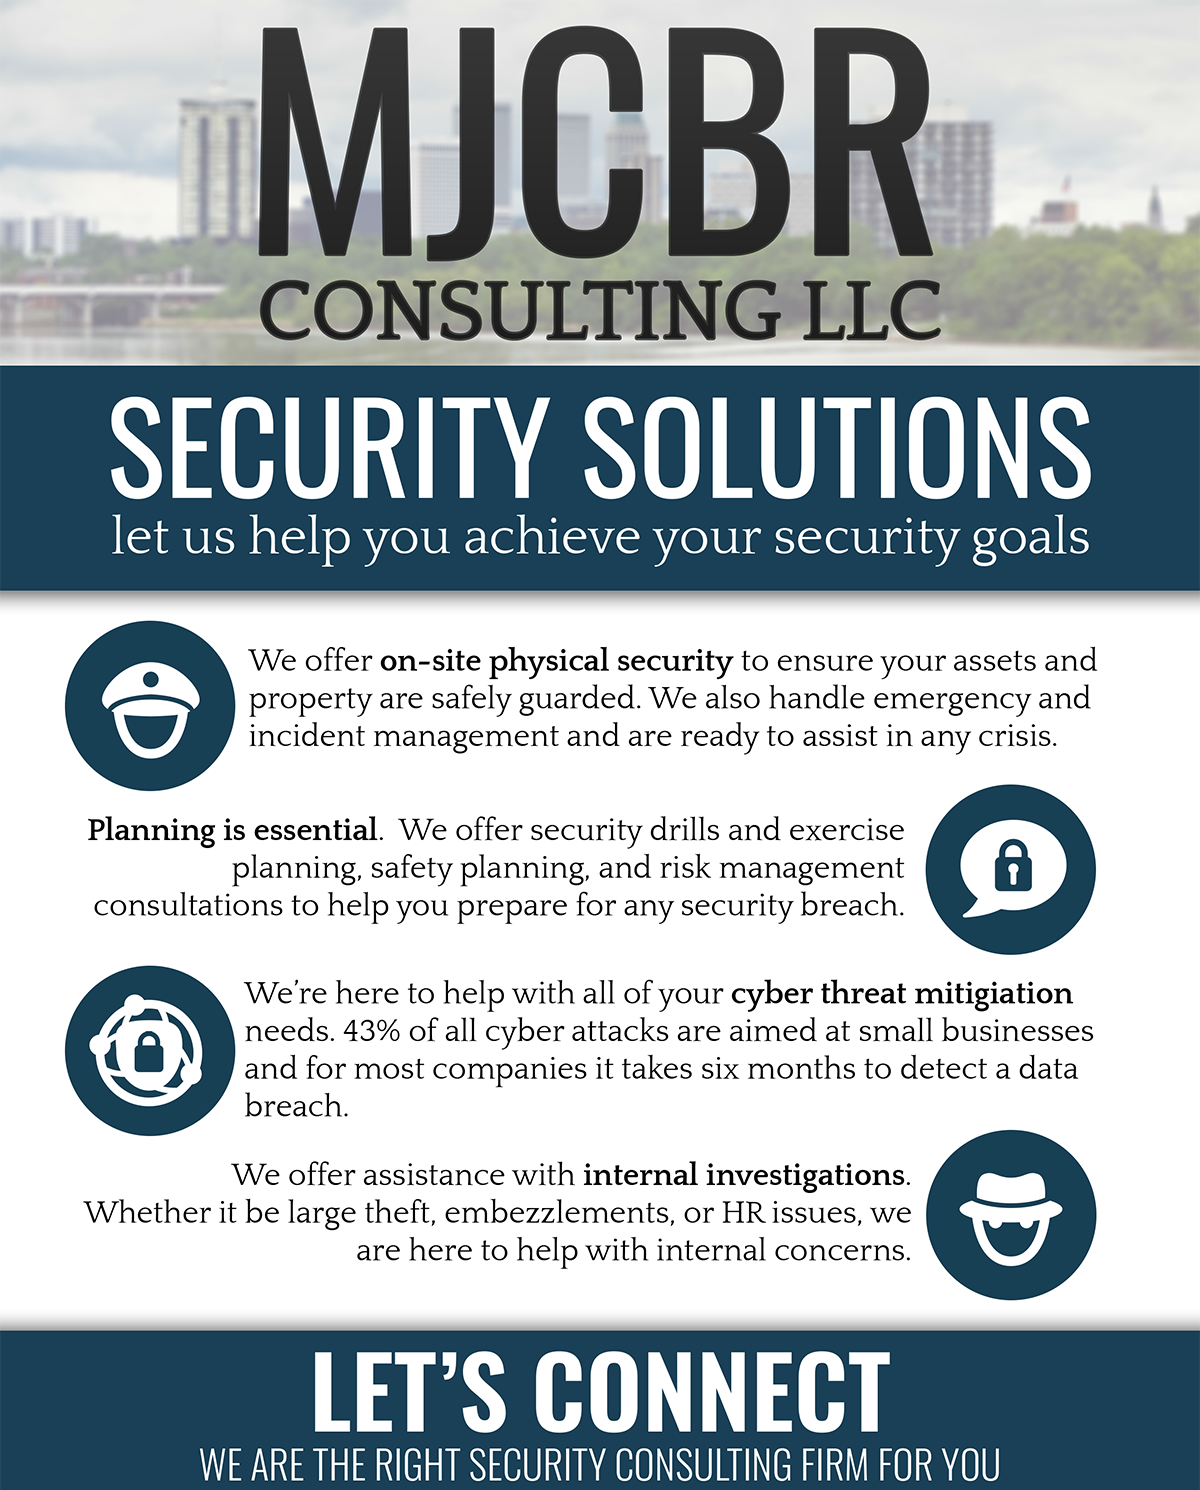 MJCBR_Consulting_LLC-Security_Solutions